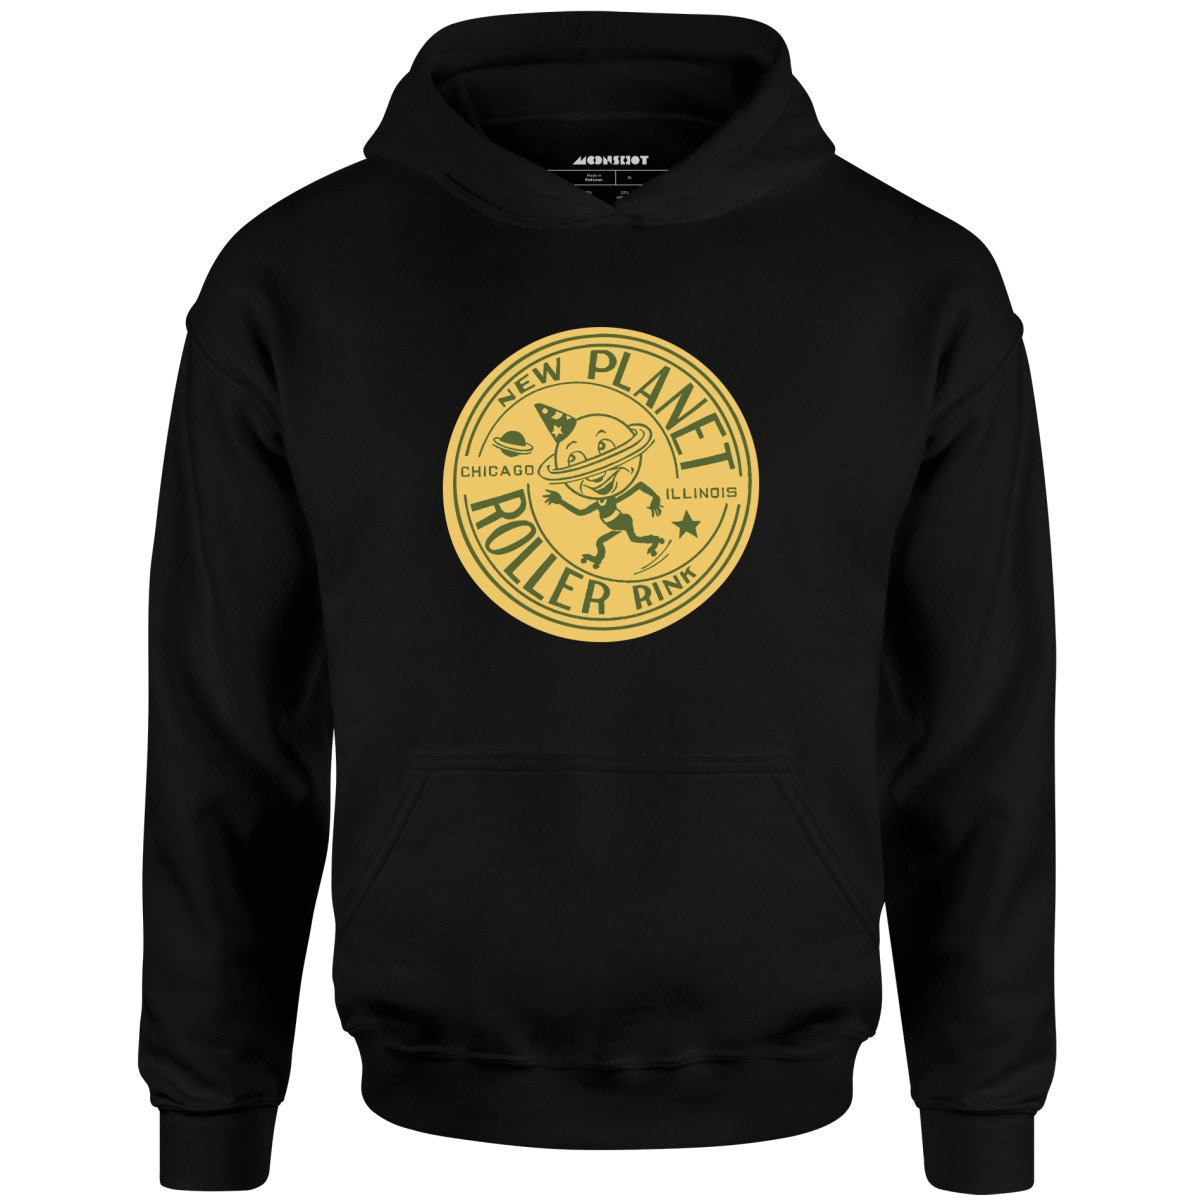 New Planet - Chicago, IL - Vintage Roller Rink - Unisex Hoodie